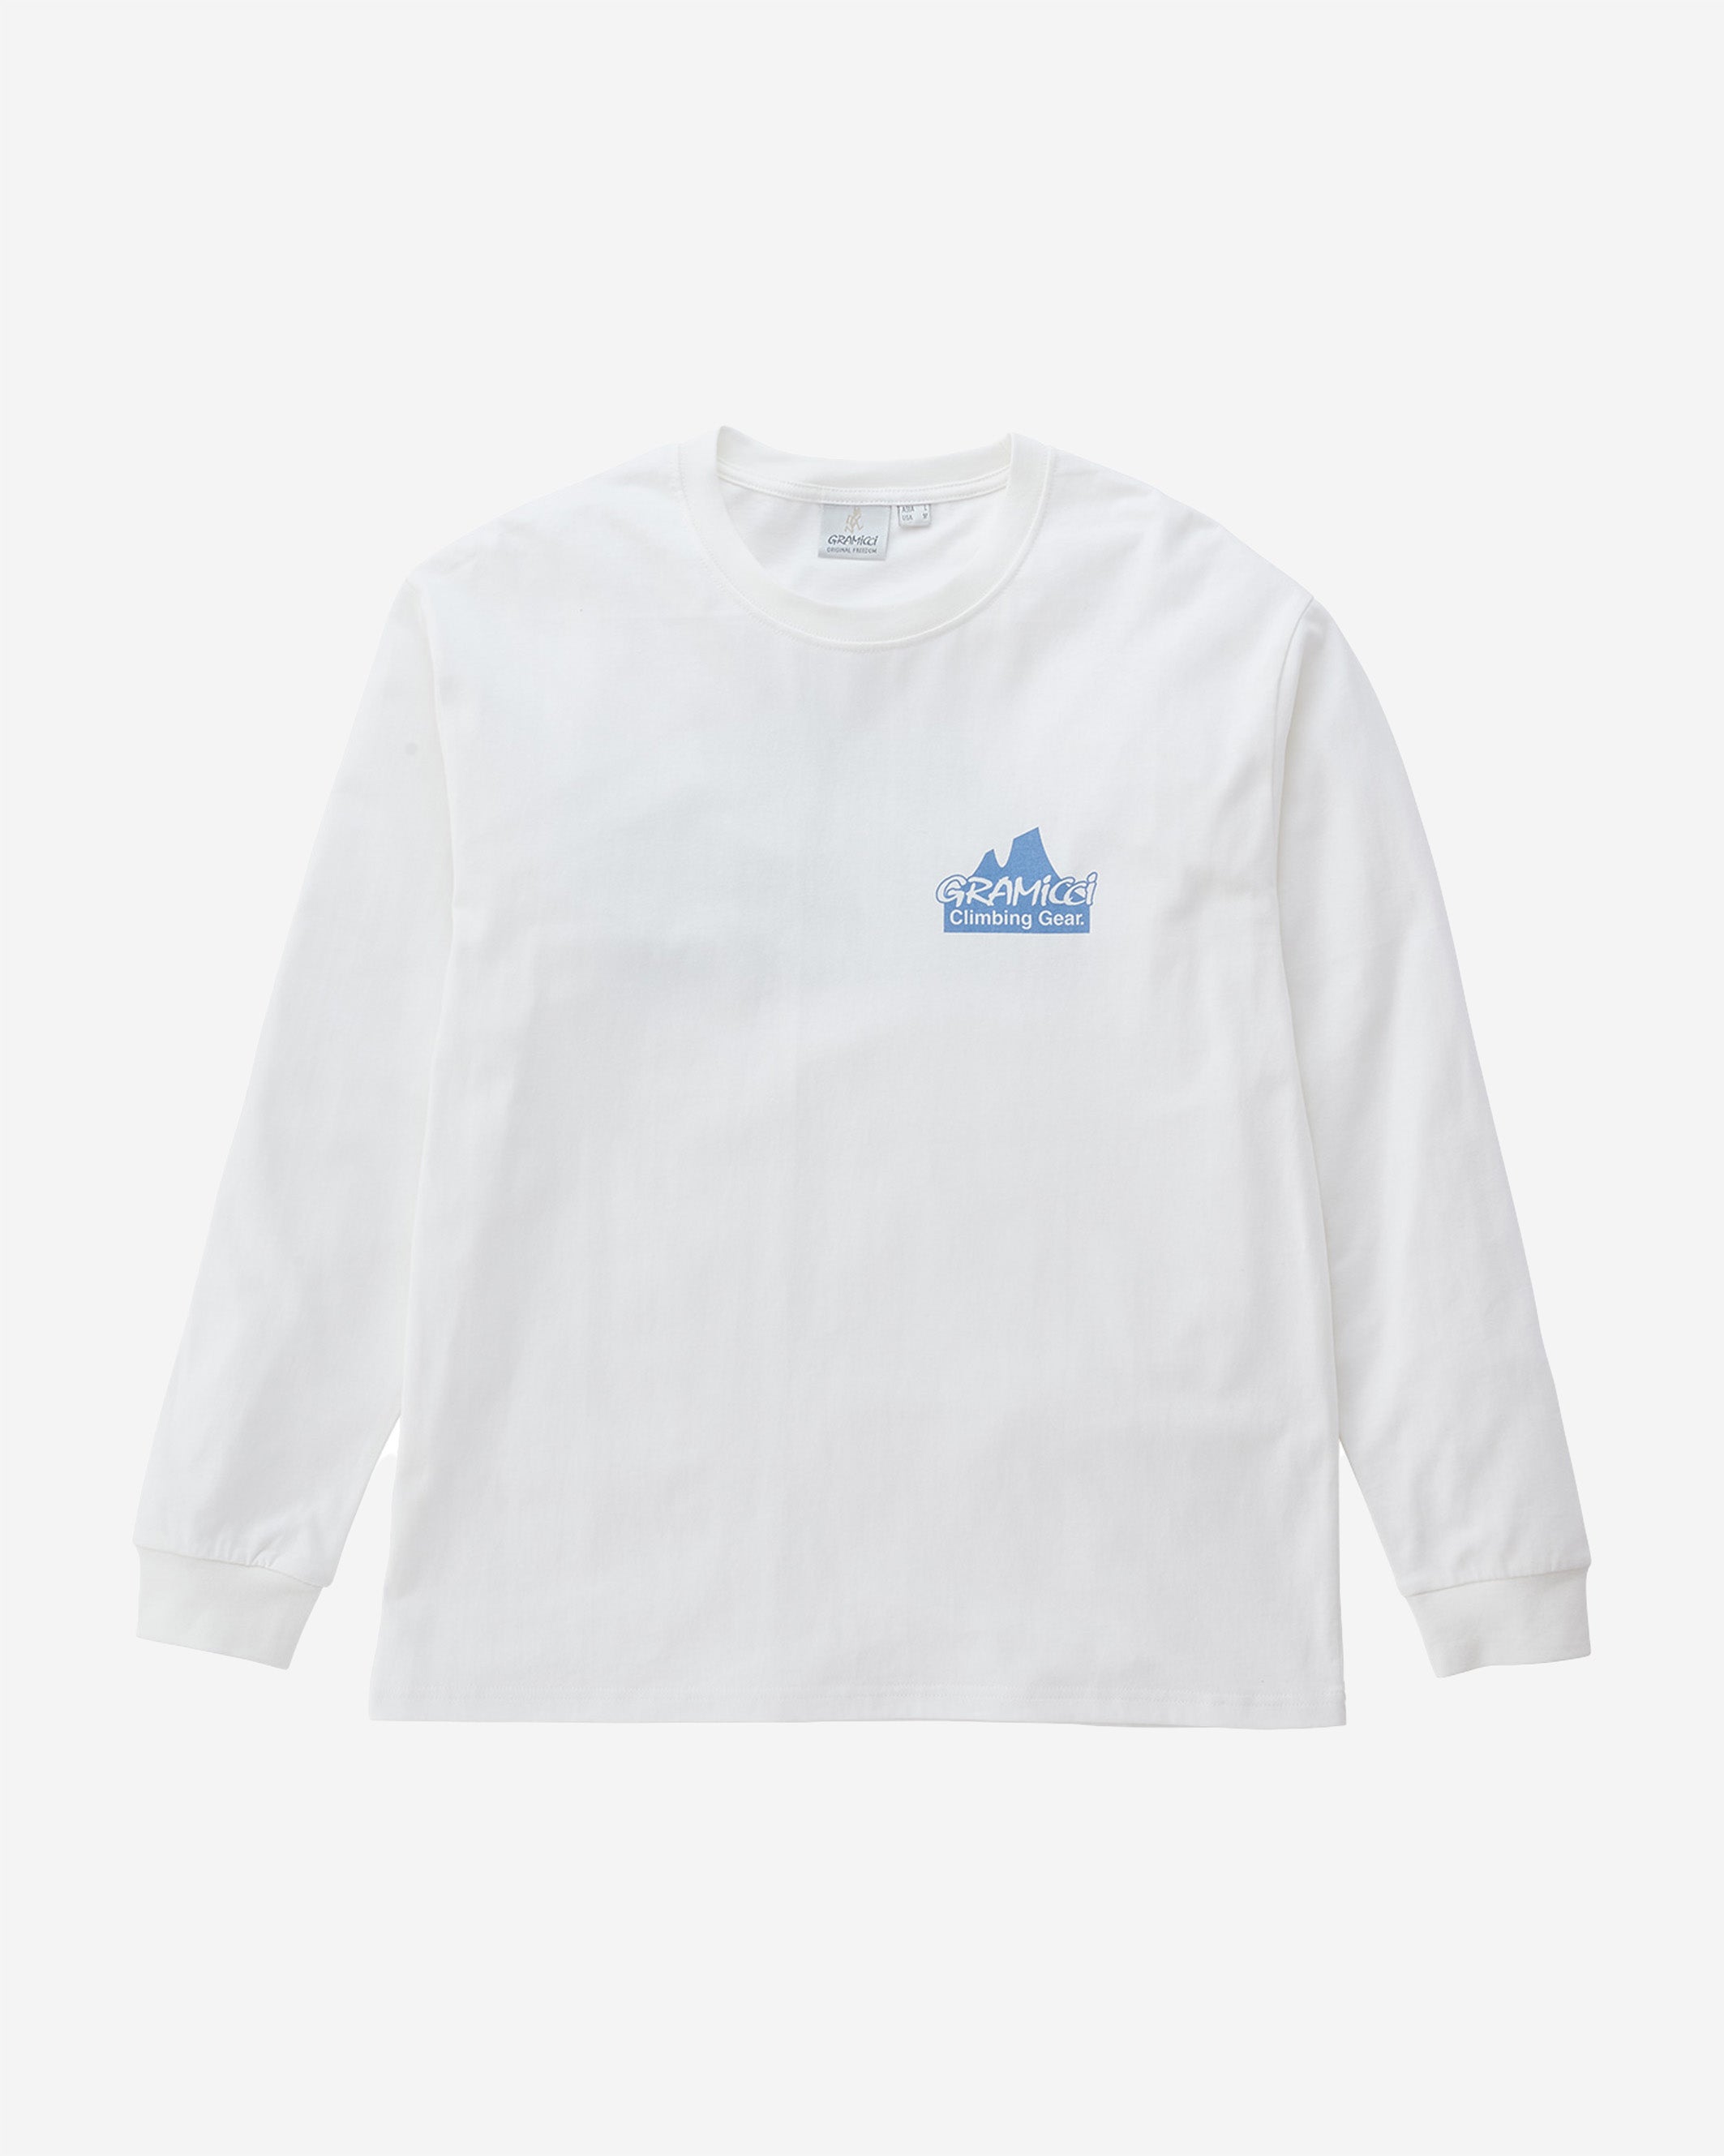 The Climbing Gear L/S Tee is made of dry-touch organic cotton that is soft and comfortable for outdoor activities or everyday wear. This long-sleeved t-shirt features a print of the silhouette of a mountain with the words "Climbing Gear" and the Gramicci logo.